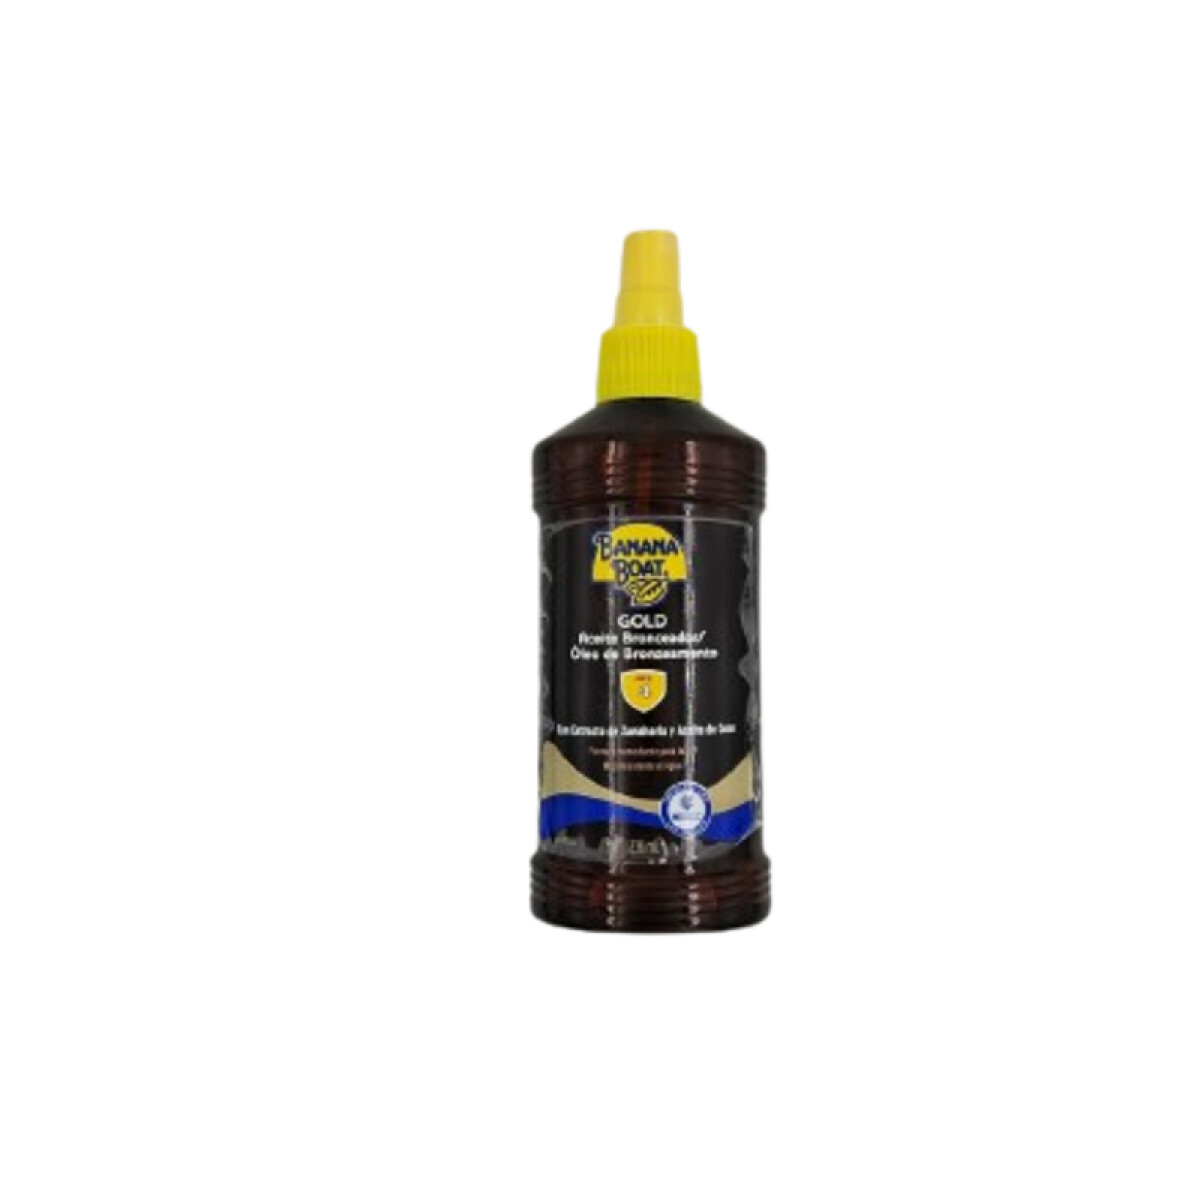 Protector solar Banana Boat - Gold Aceite fps 4 